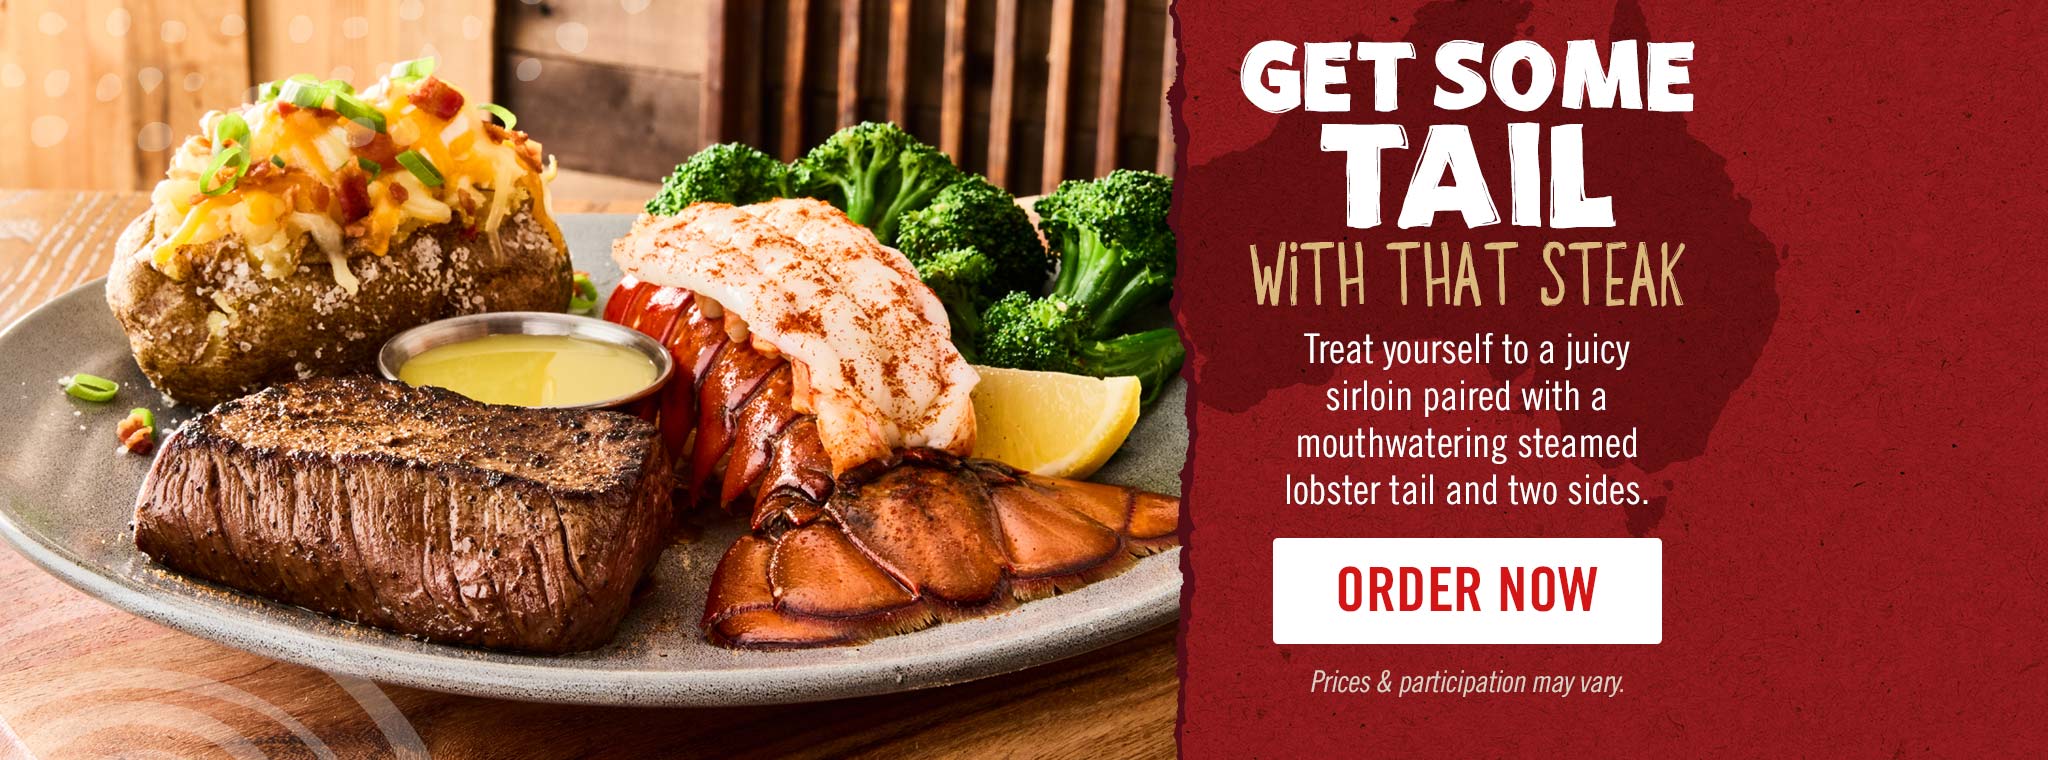 Get some tail with that steak. Treat yourself to a juicy sirloin paired with a mouthwatering steamed lobster tail and two sides.